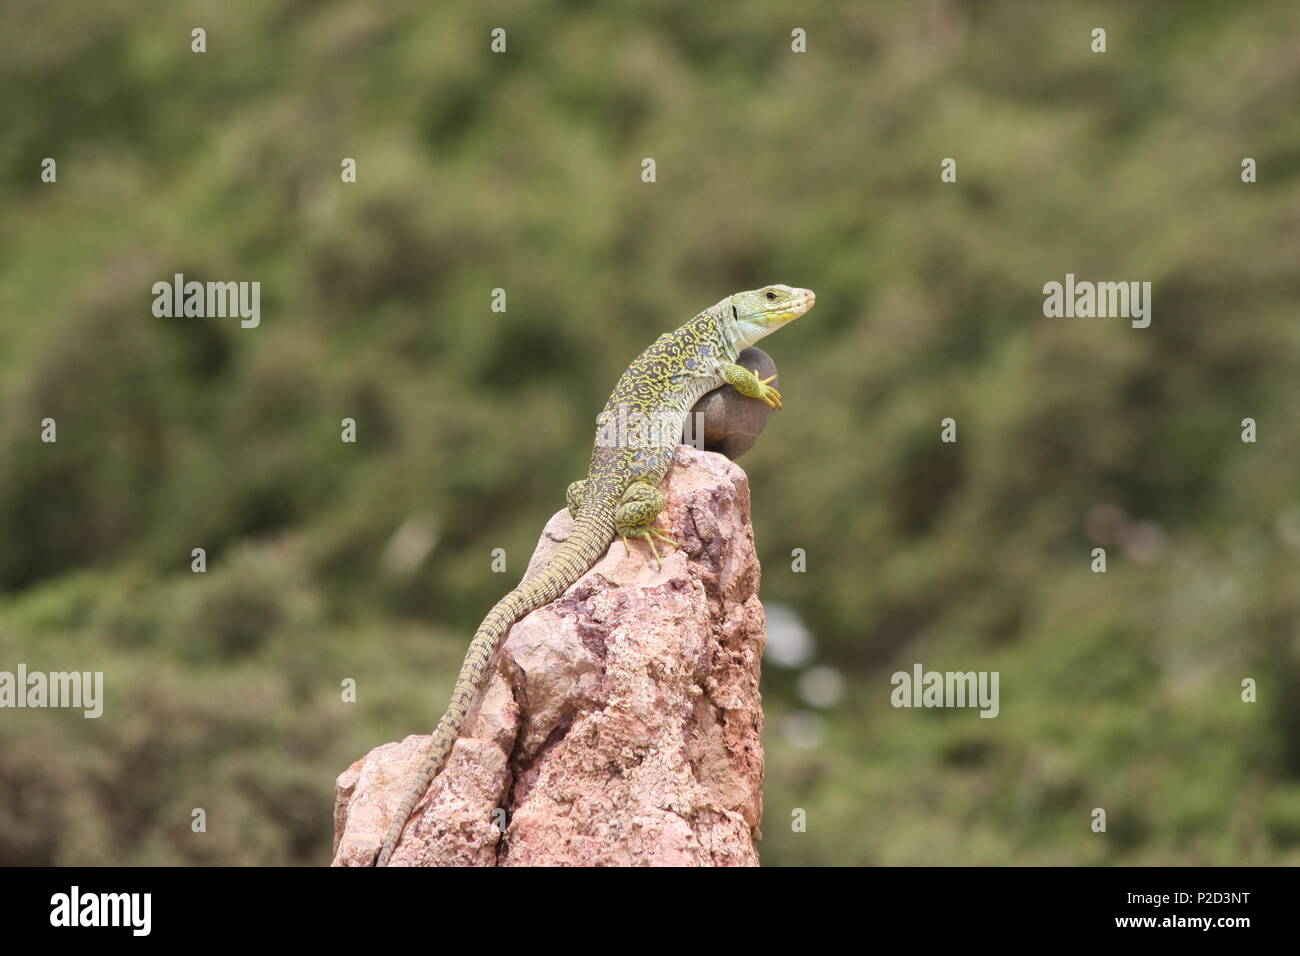 Ocellated Lizard (Timon lepidus) a.k.a eyed lizard. South West Portugal. Stock Photo